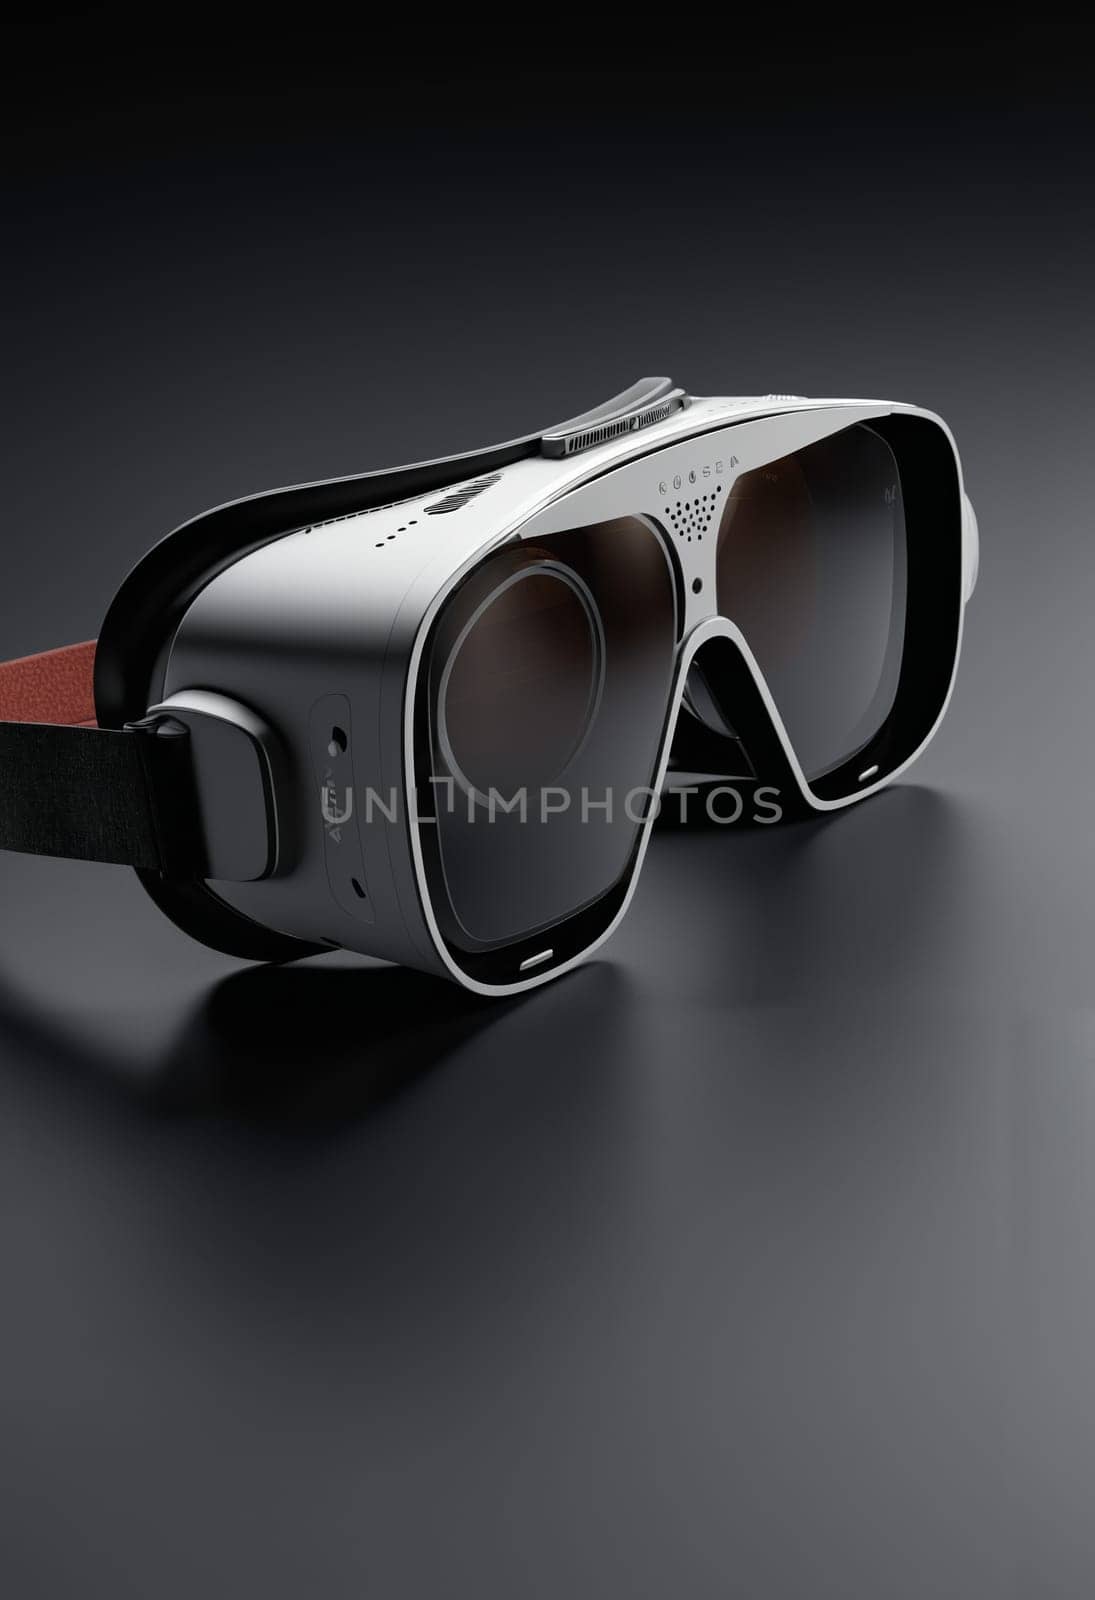 3d render of VR glasses on a gray background with shadow